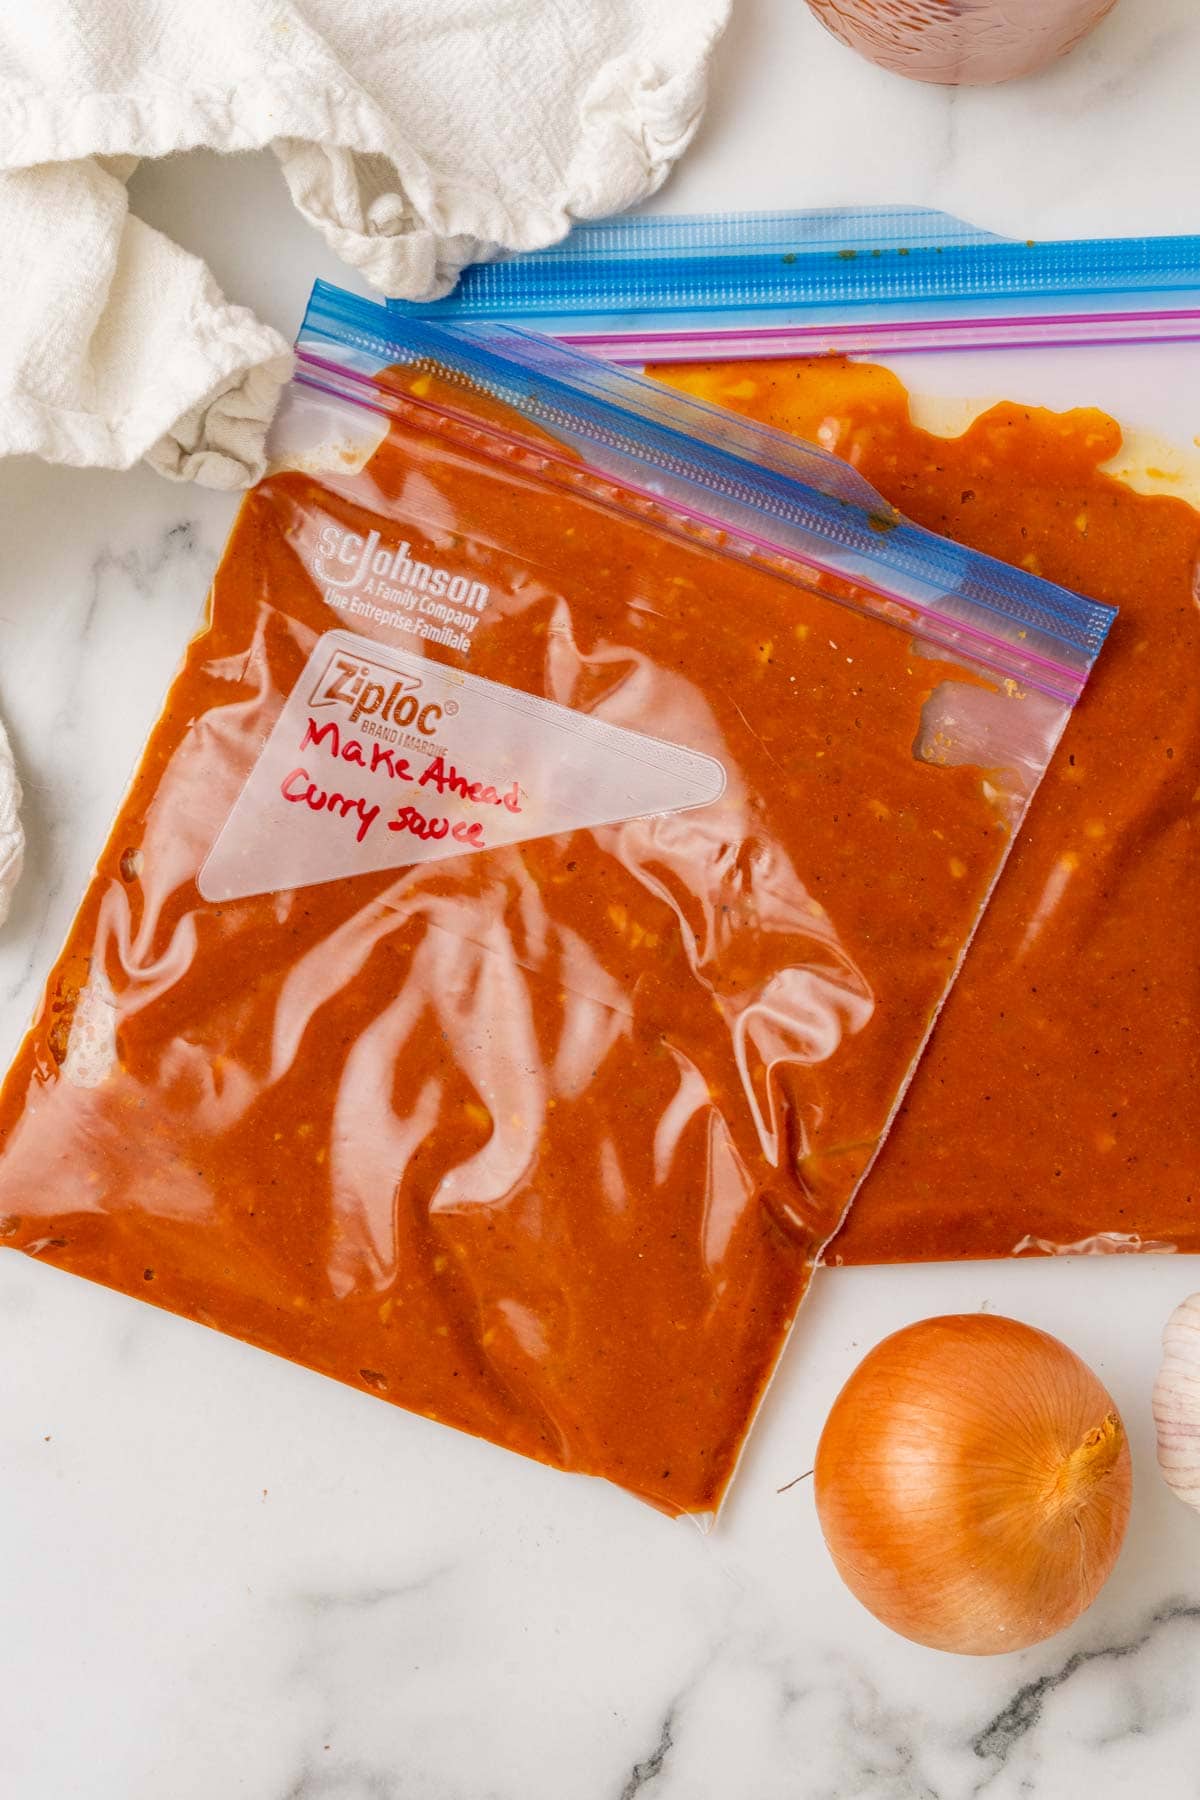 Ziploc bags with curry sauce, ready to freeze